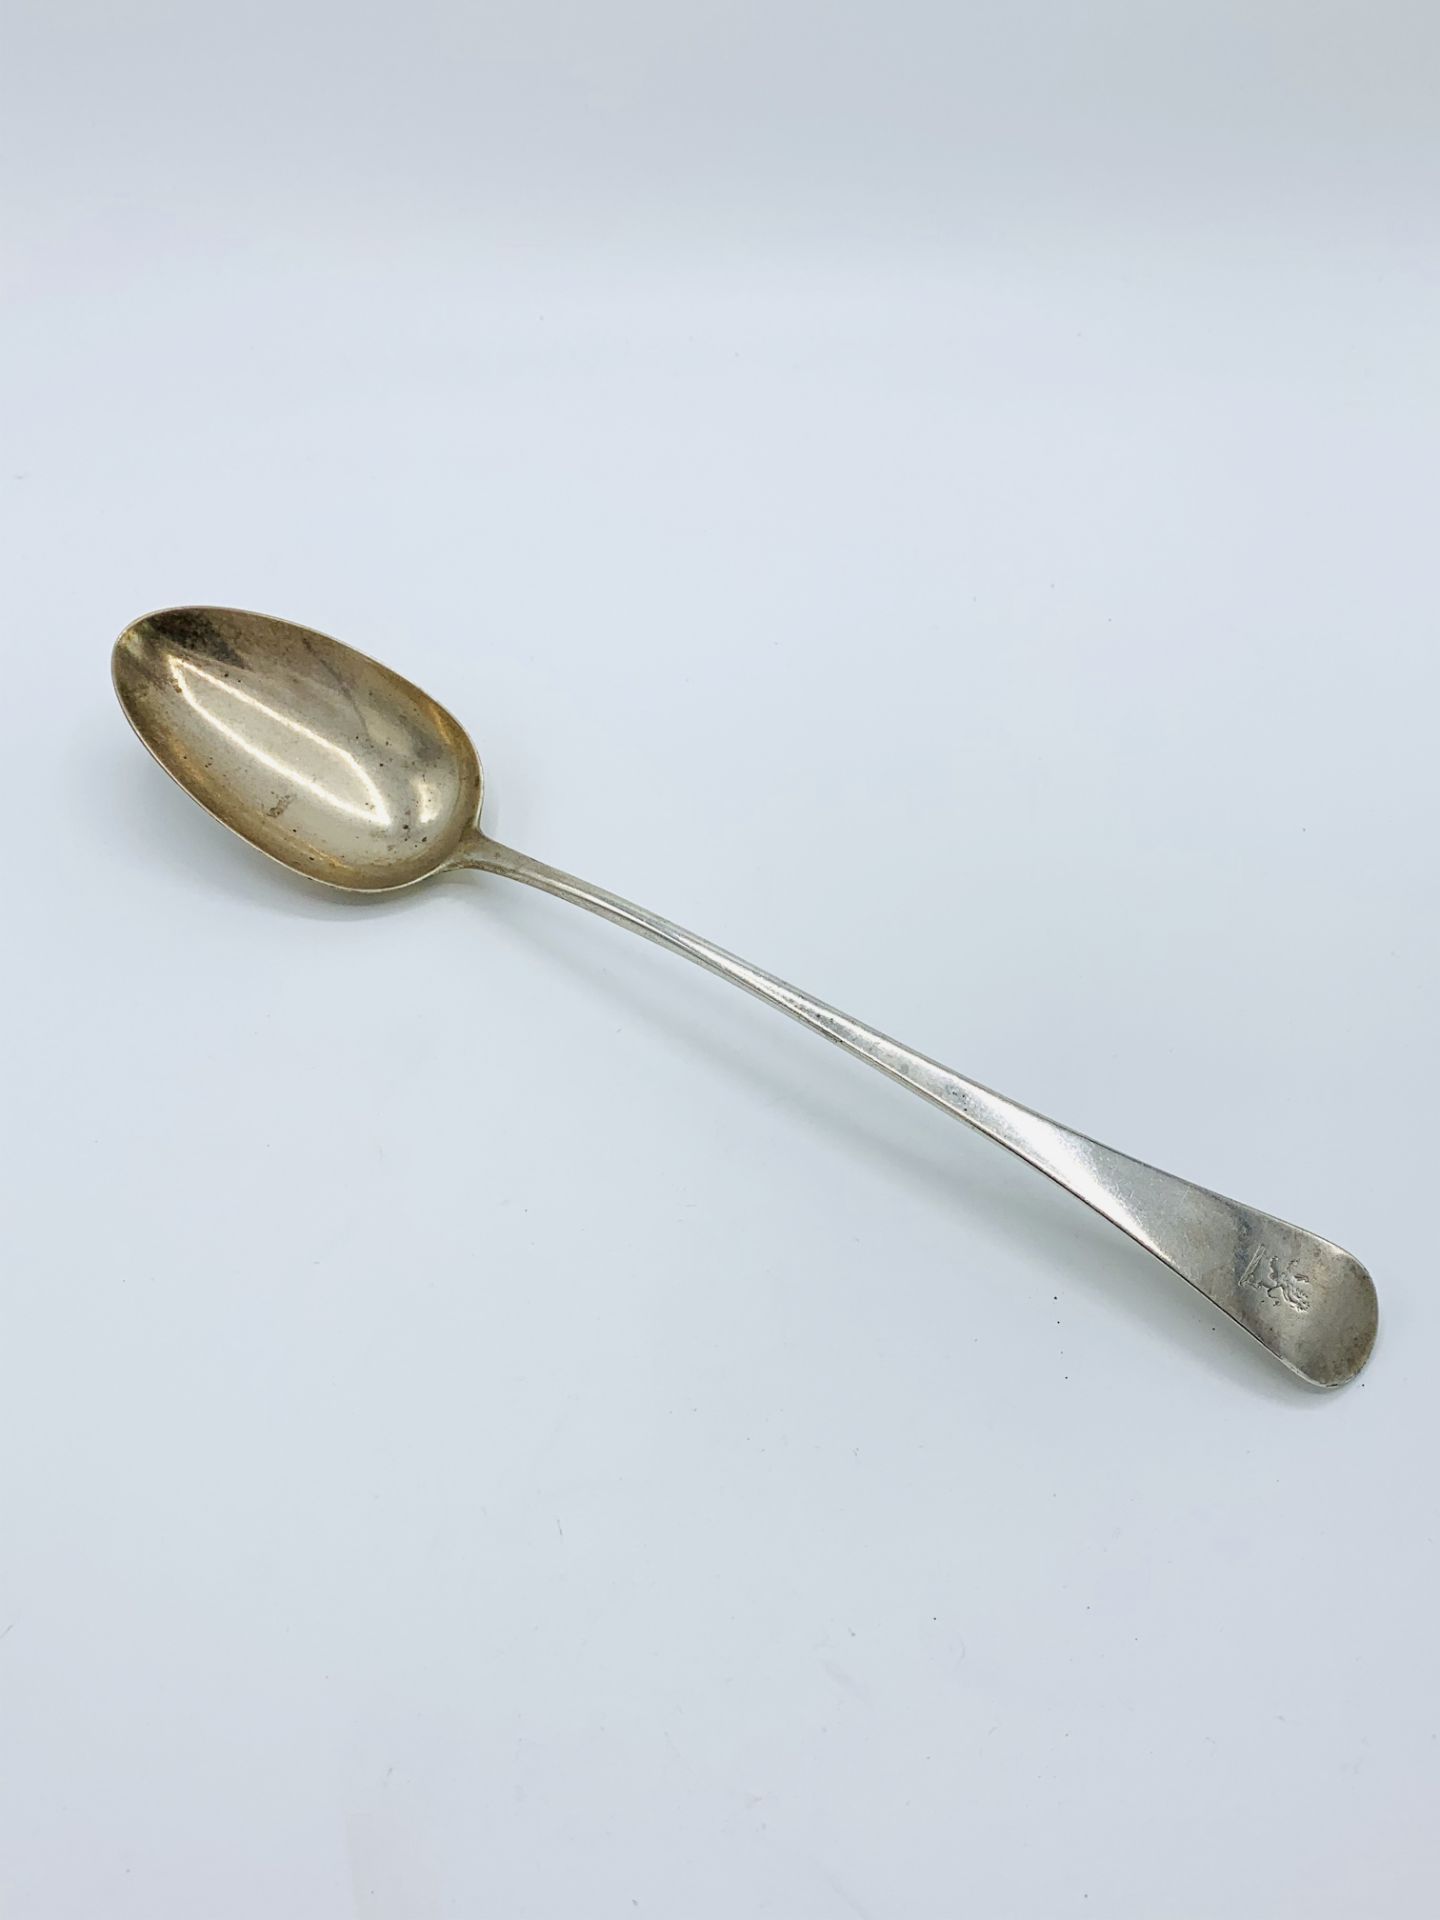 Late 18th century silver serving spoon - Image 2 of 2